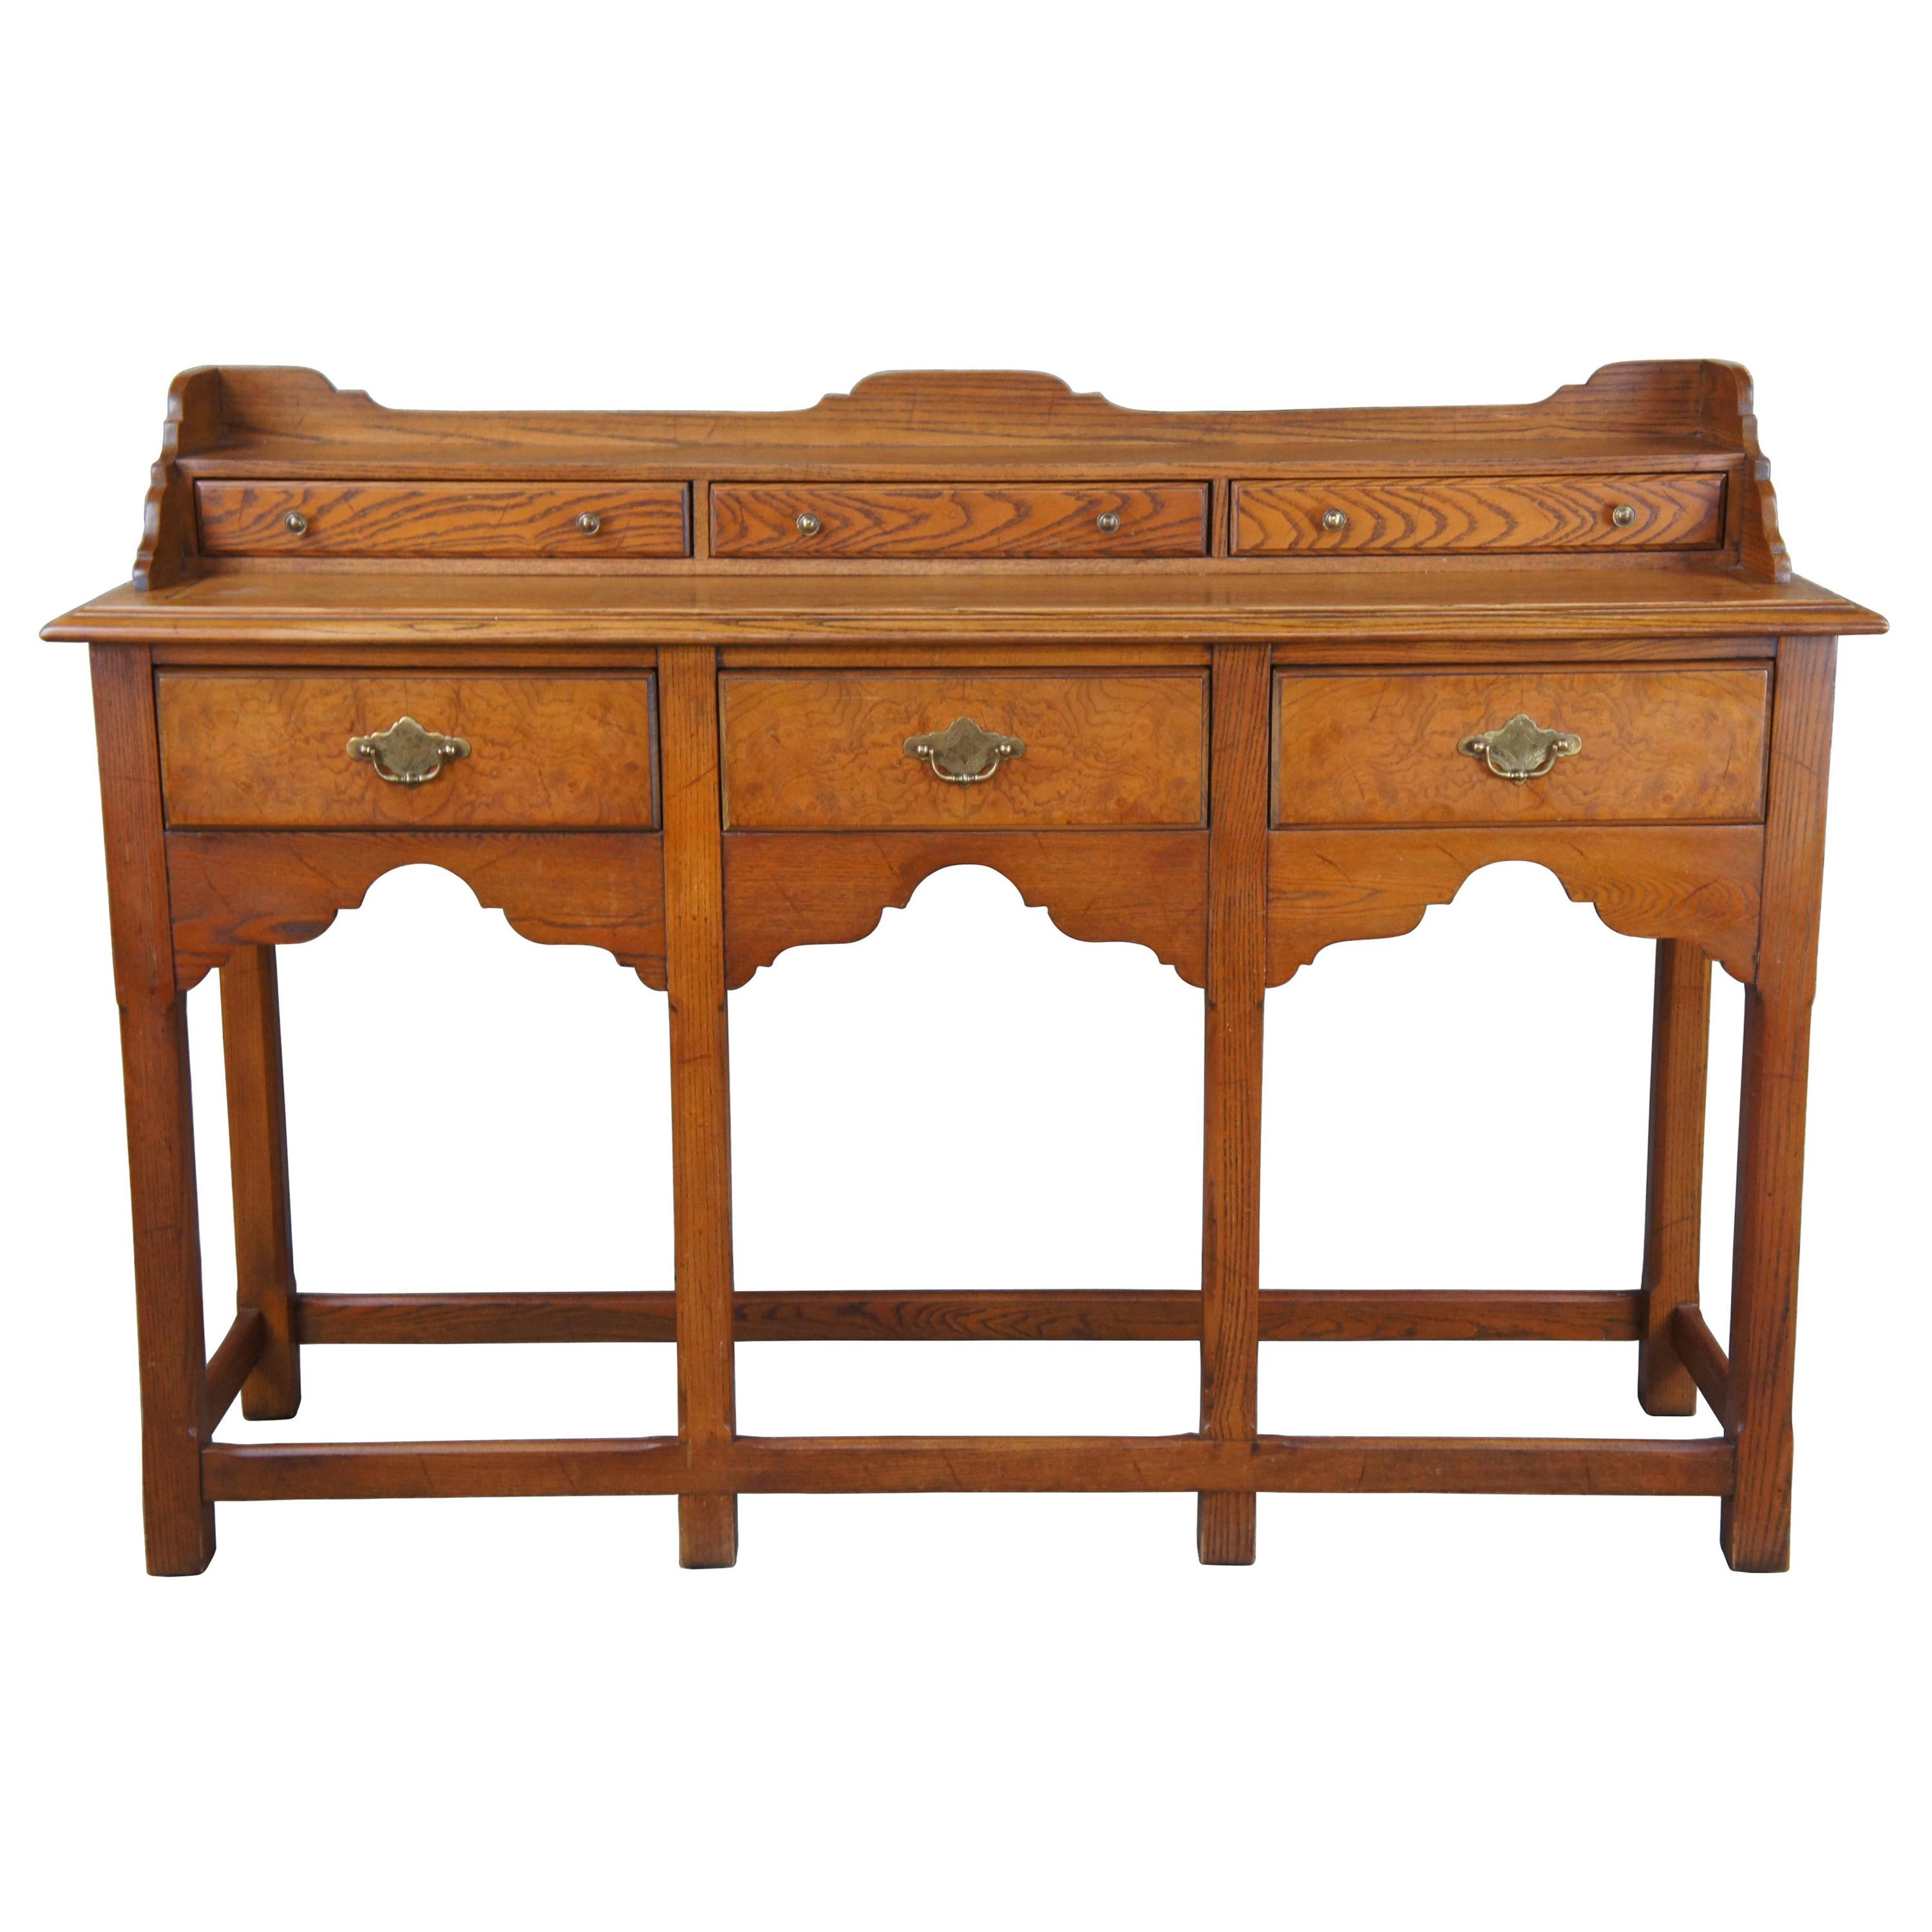 Hekman Oak & Olive Ash Burled Asian Sideboard Console Altar Hall Entry Table